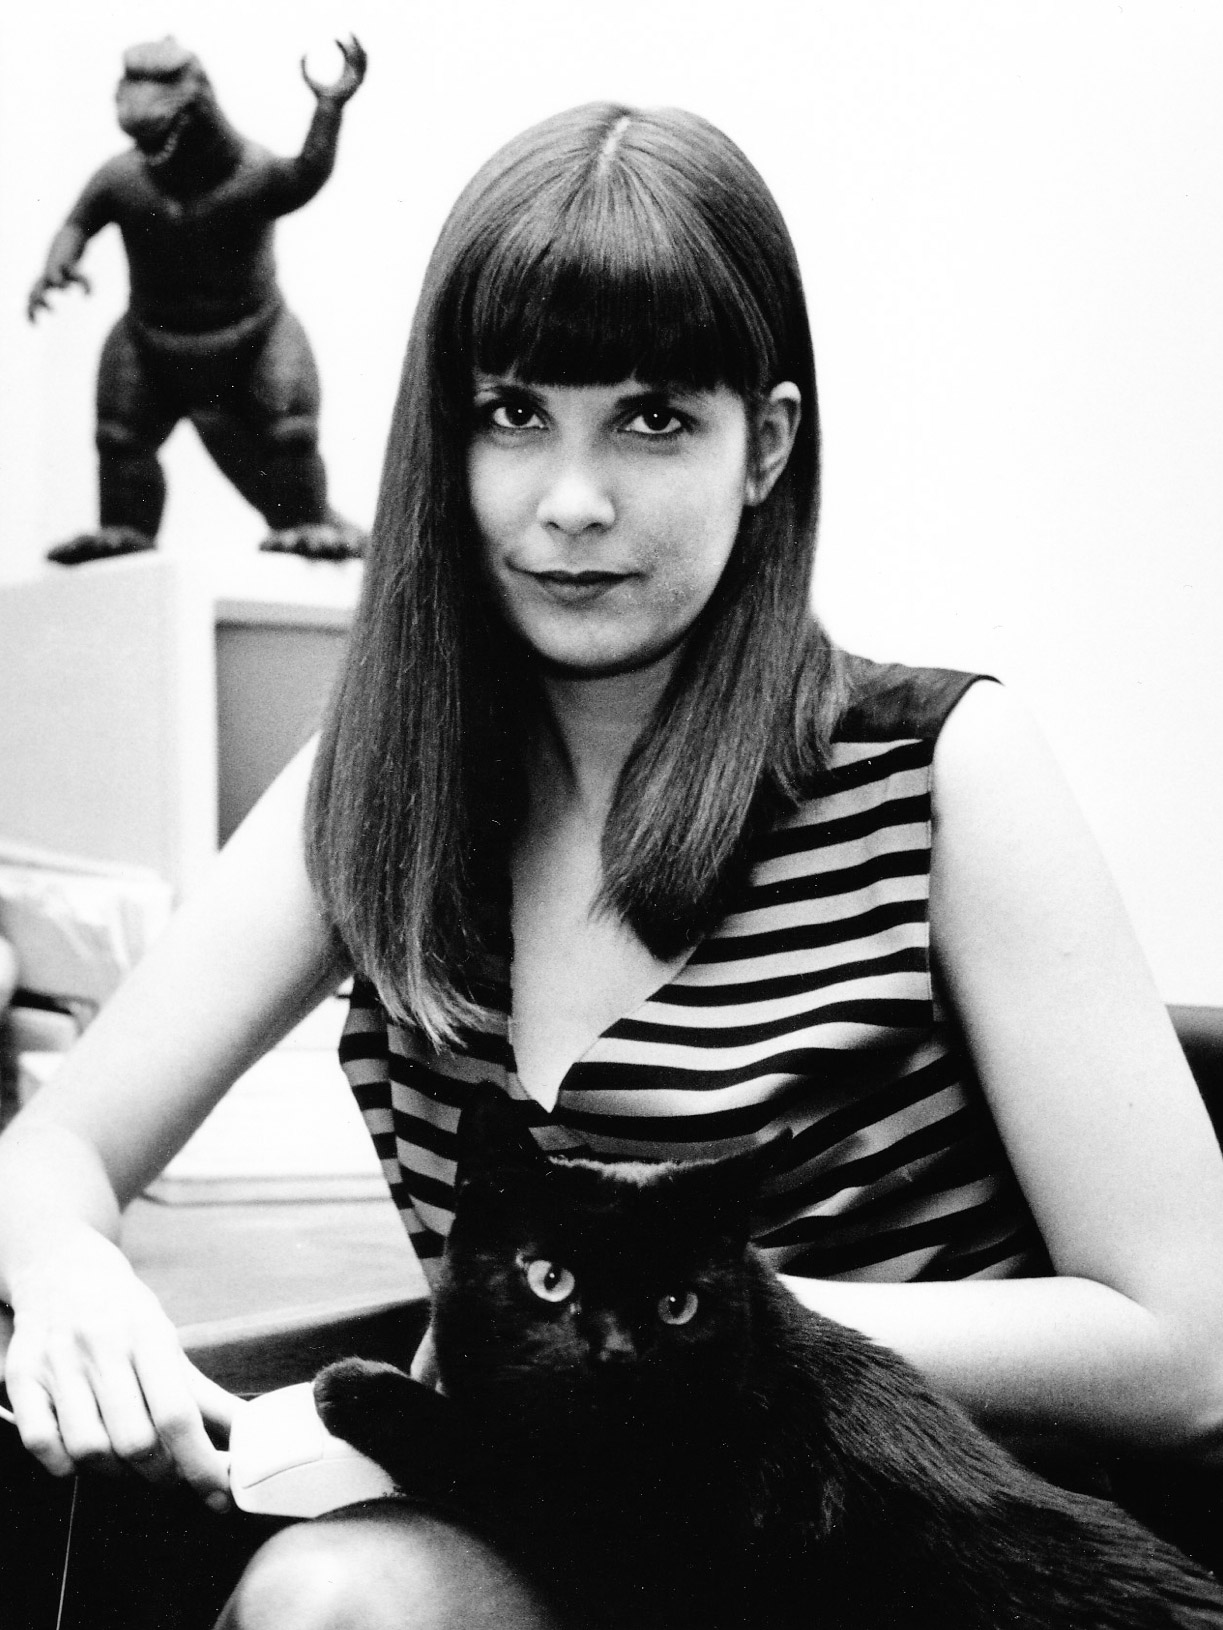 Stacy Horn posing next to a computer with a black cat and a figurine of Godzilla.